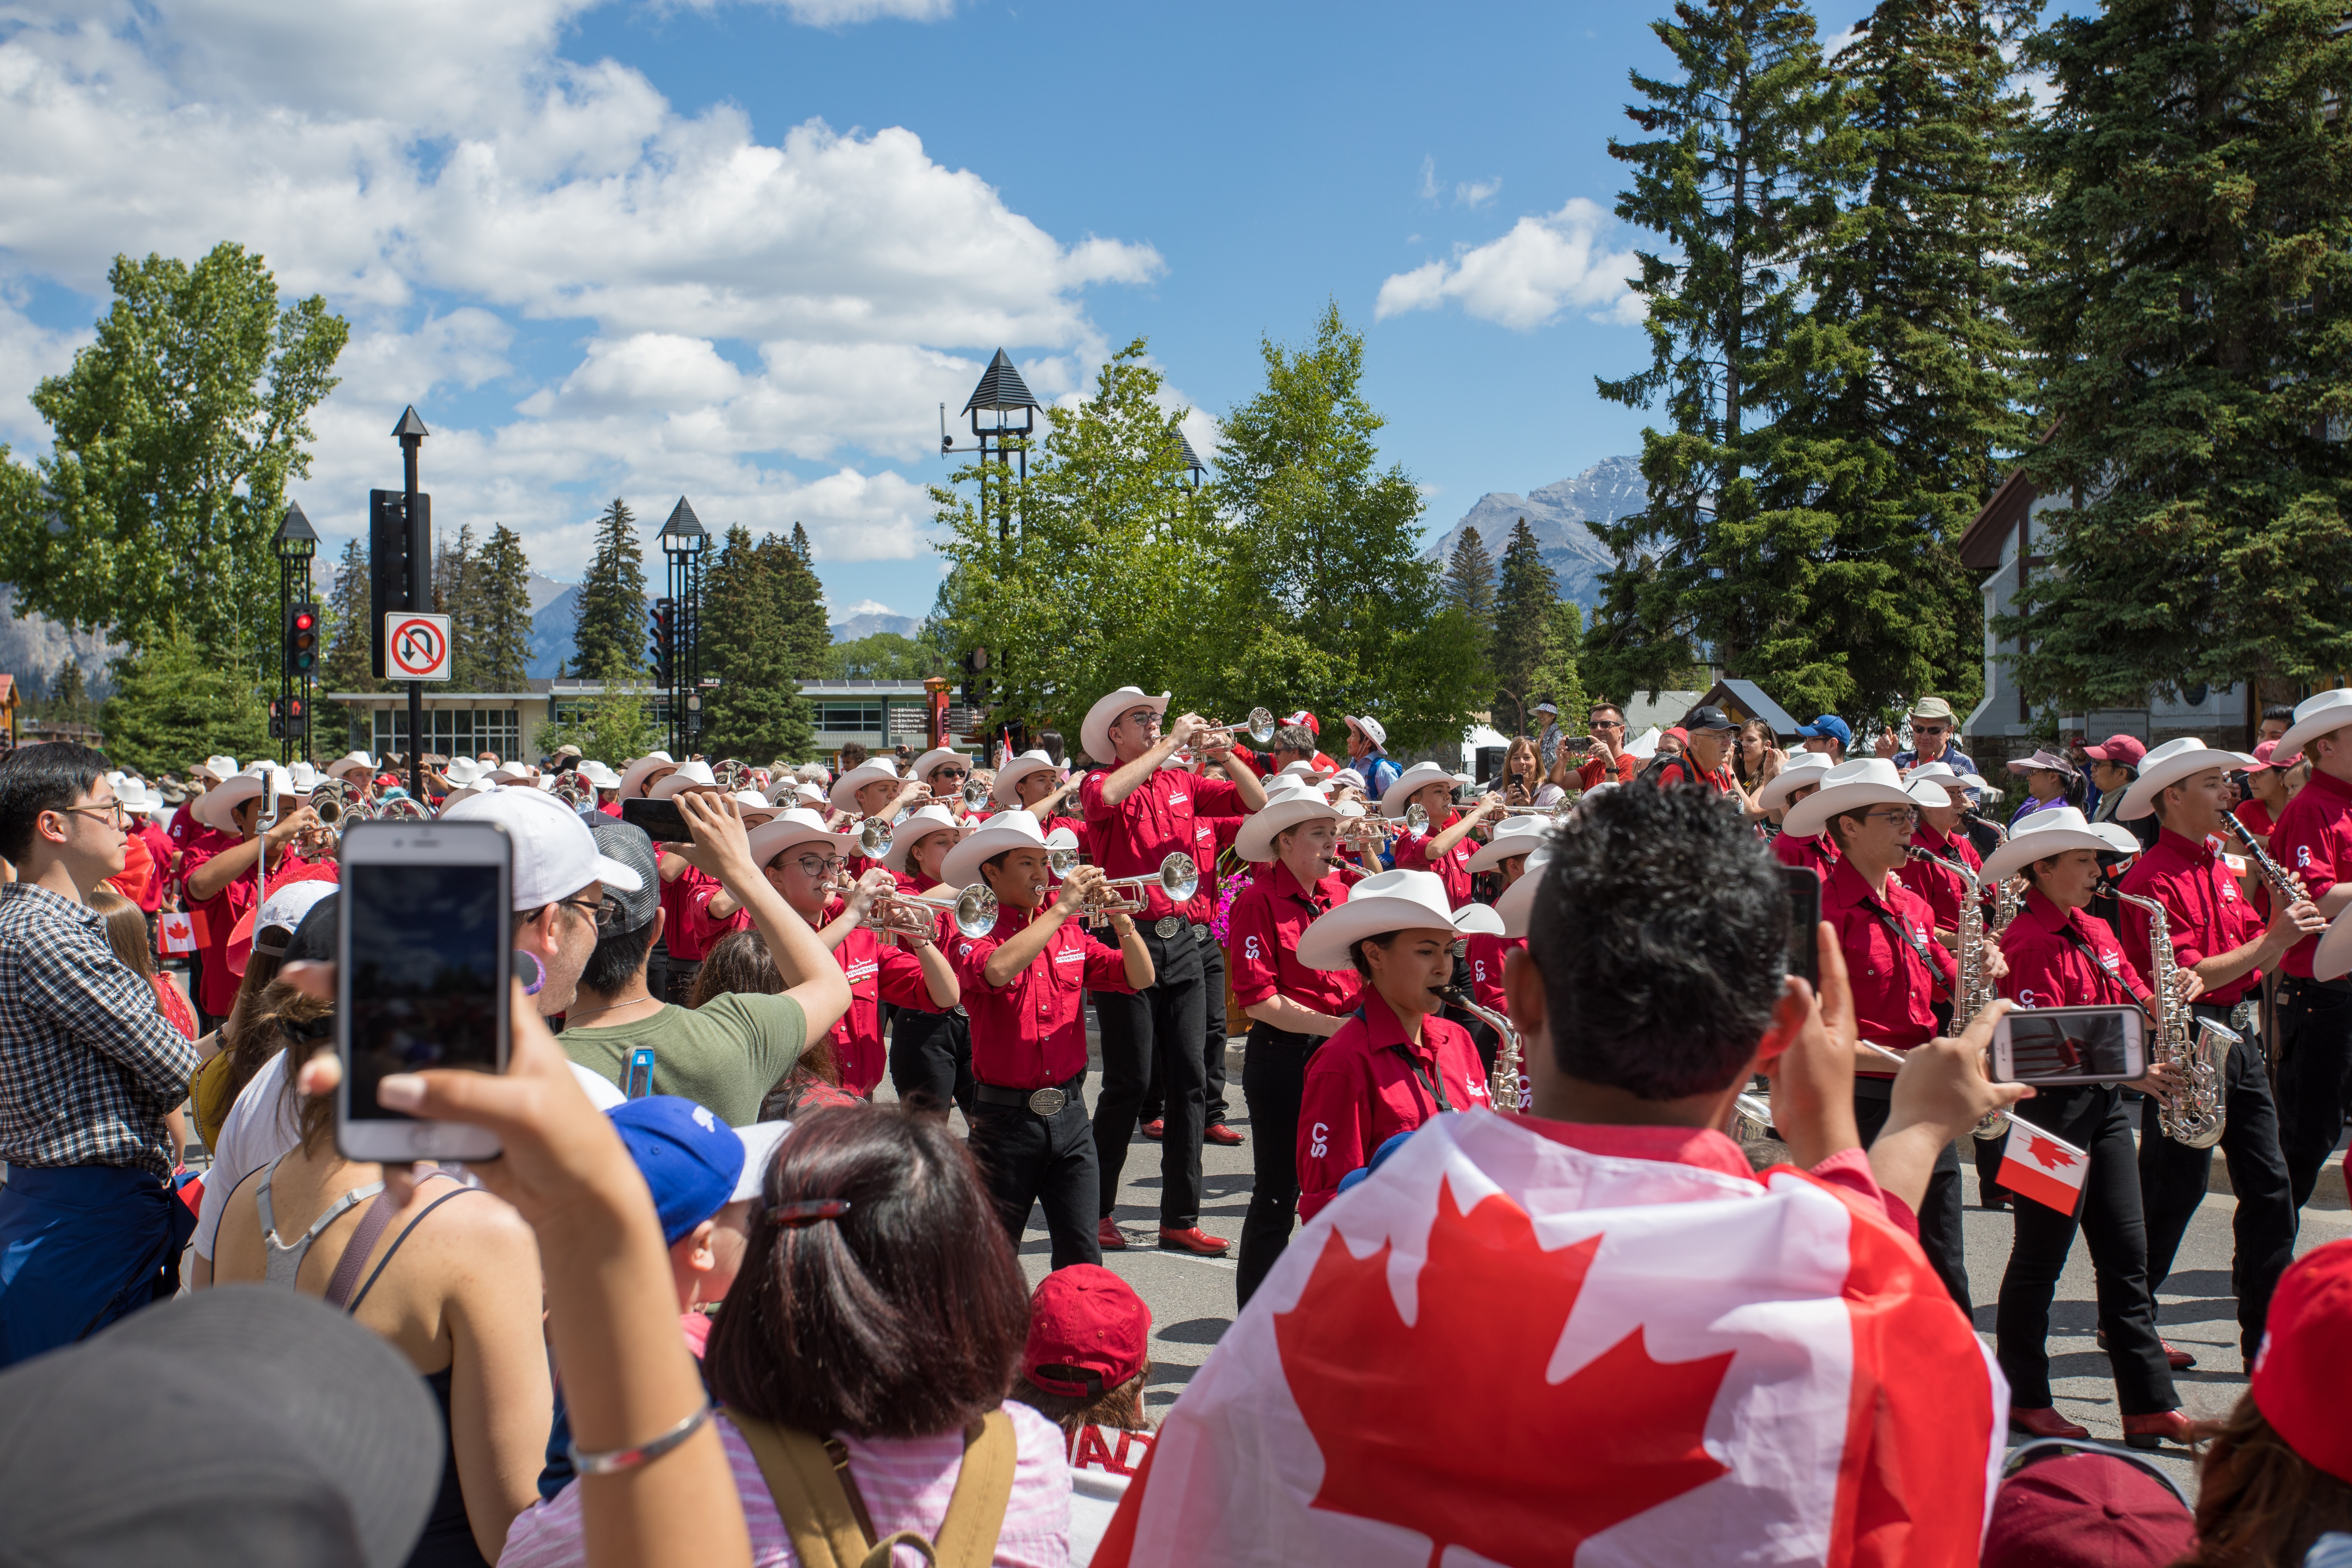 Canada Day is a Canadian stat holiday celebrated federally.